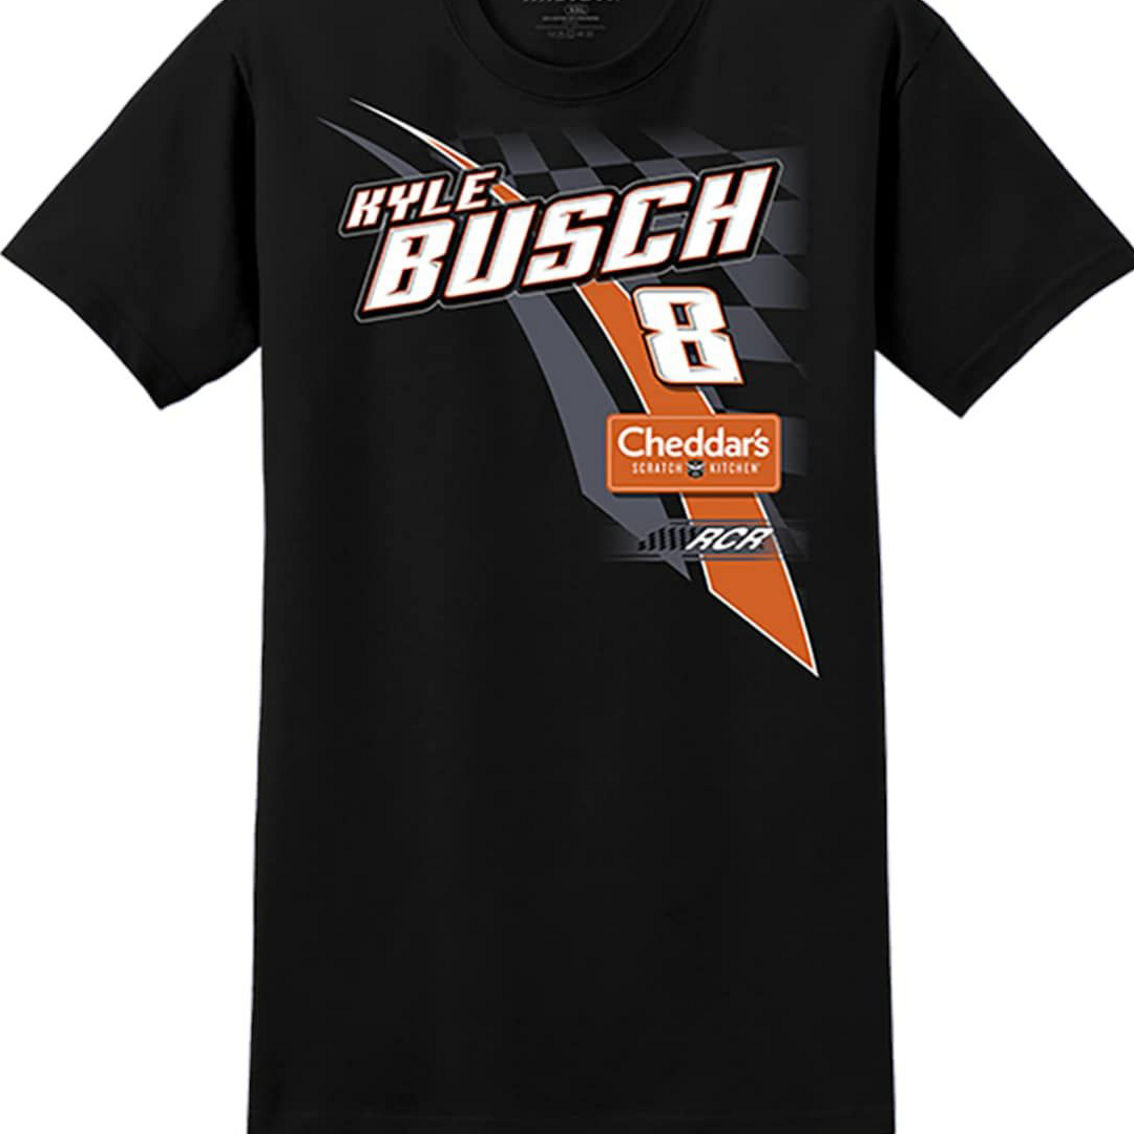 Richard Childress Racing Team Collection Men's Richard Childress Racing Team Collection Black Kyle Busch Cheddar's Lifestyle T-Shirt - Image 3 of 4